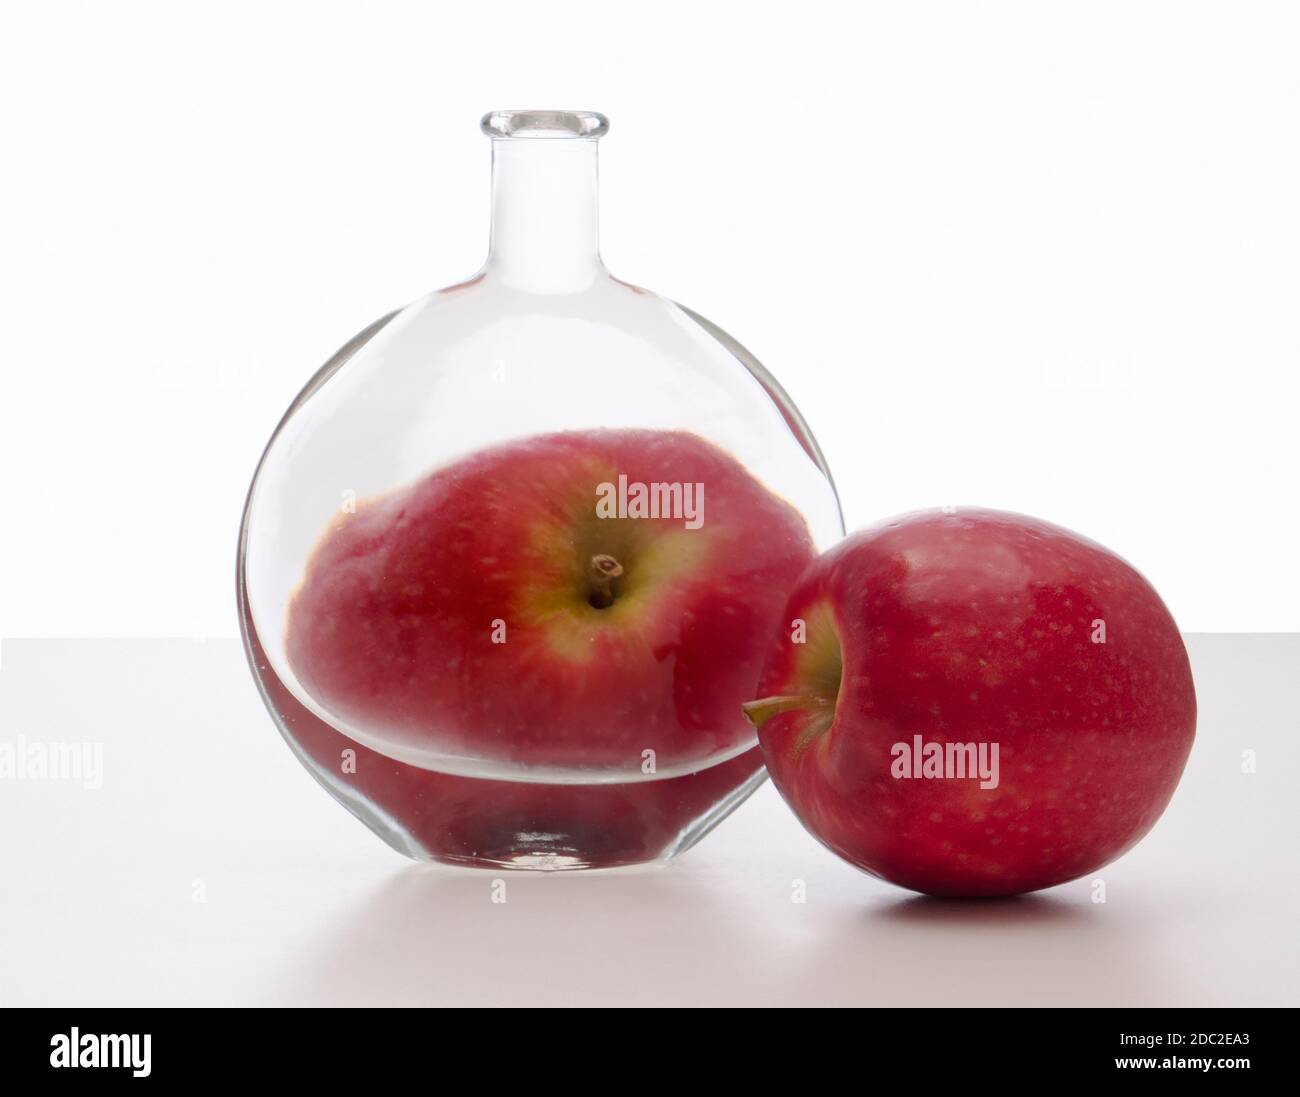 Distortion, refraction through water and bottle. With apple. Stock Photo